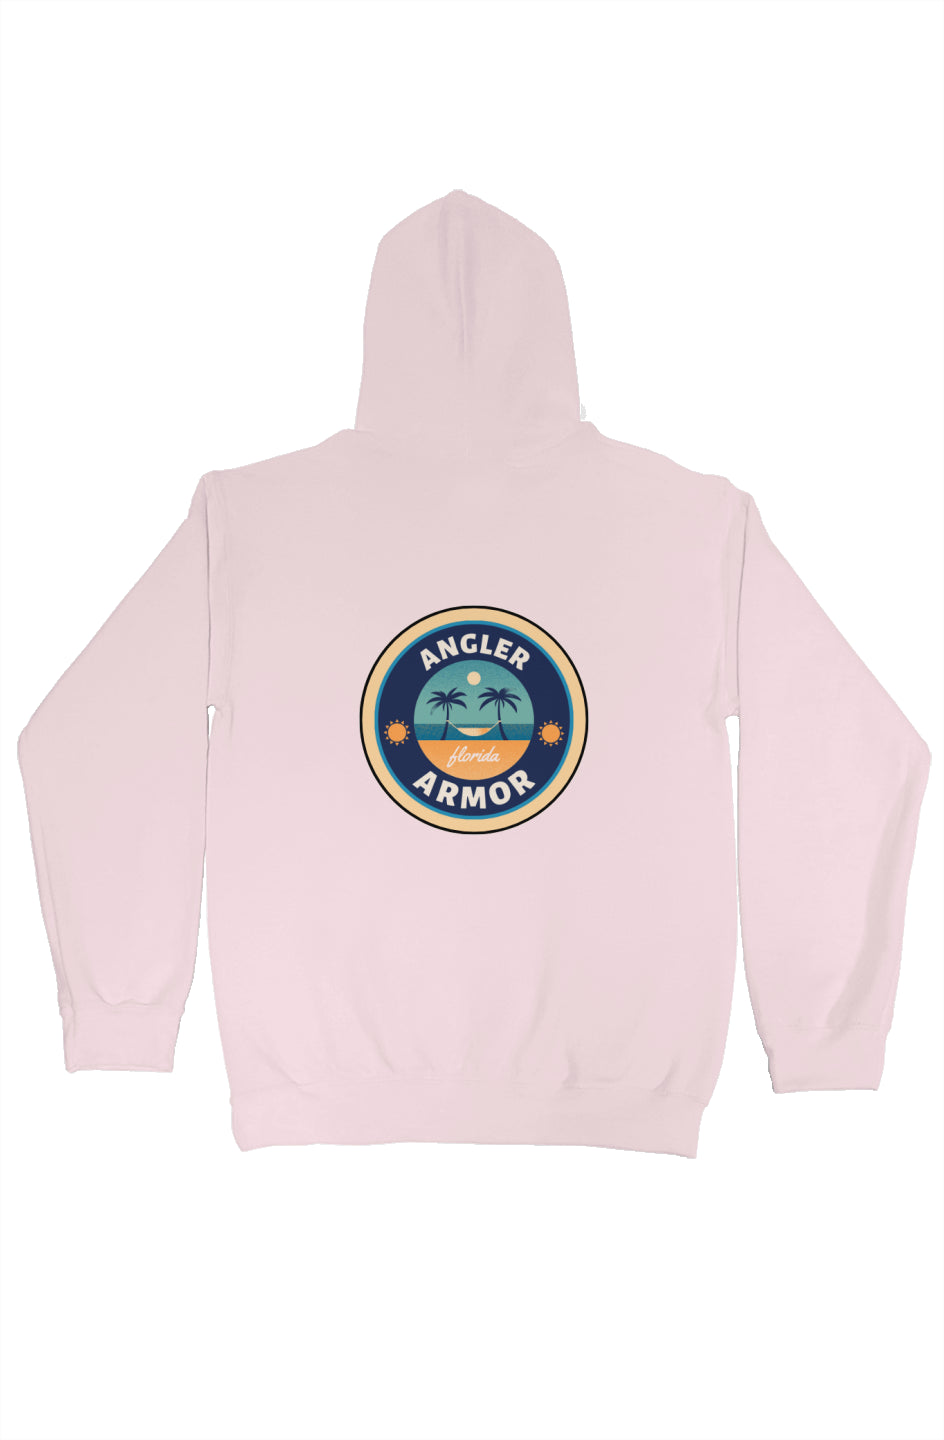 Angler Armor Light Pink Pullover Hoodie